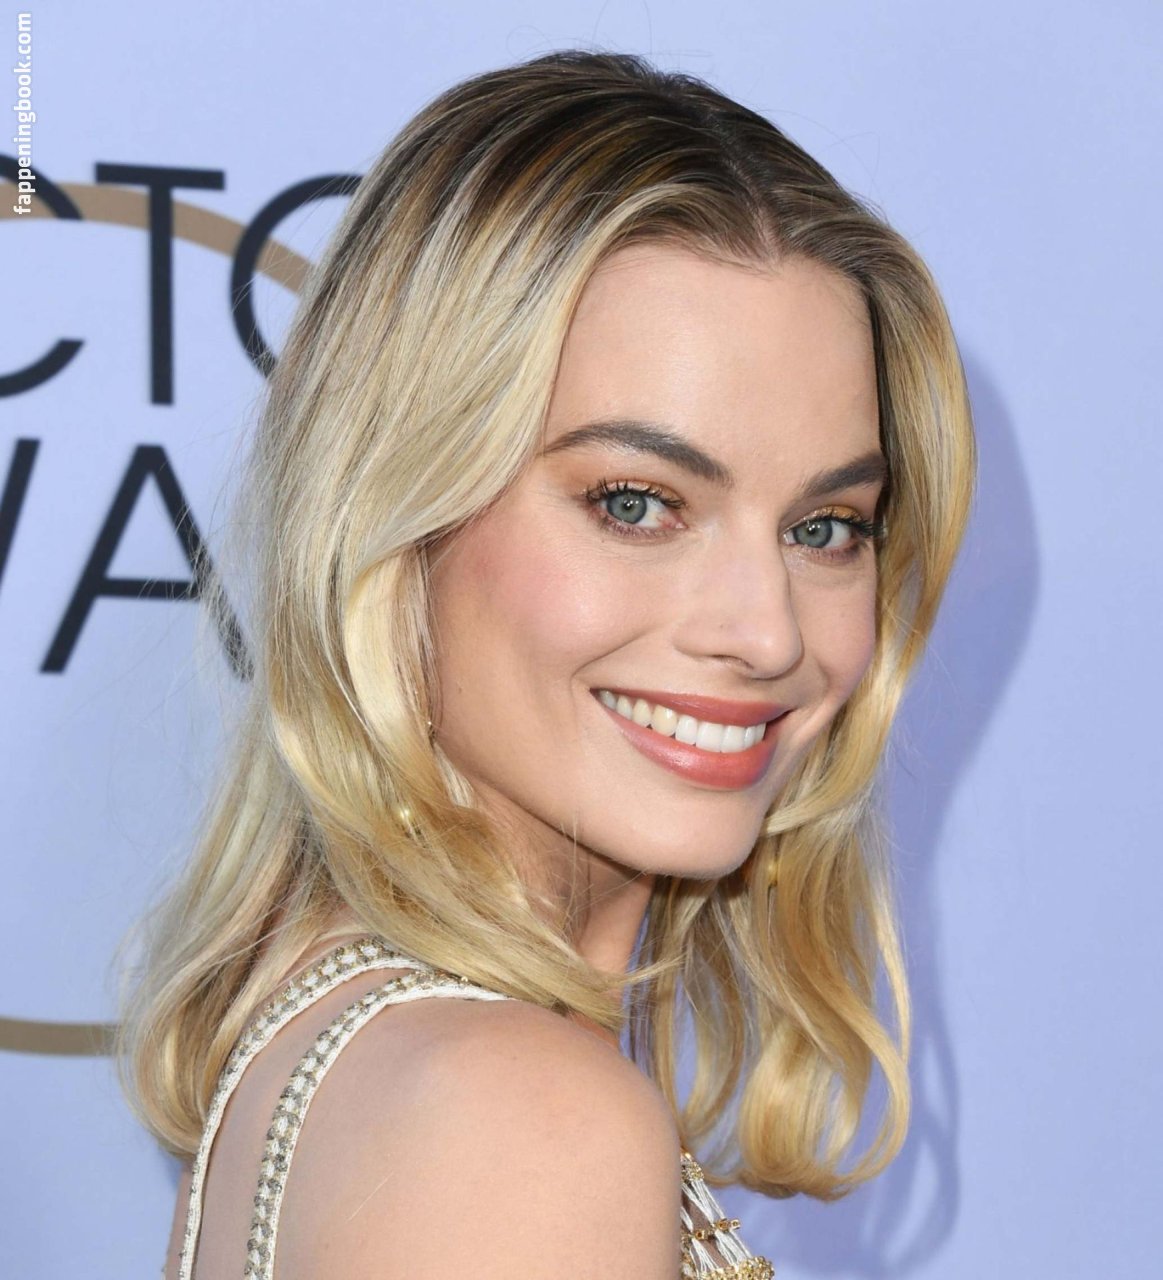 Margot Robbie Nude Photo Collection Leak Celebrity Leaks Scandals My